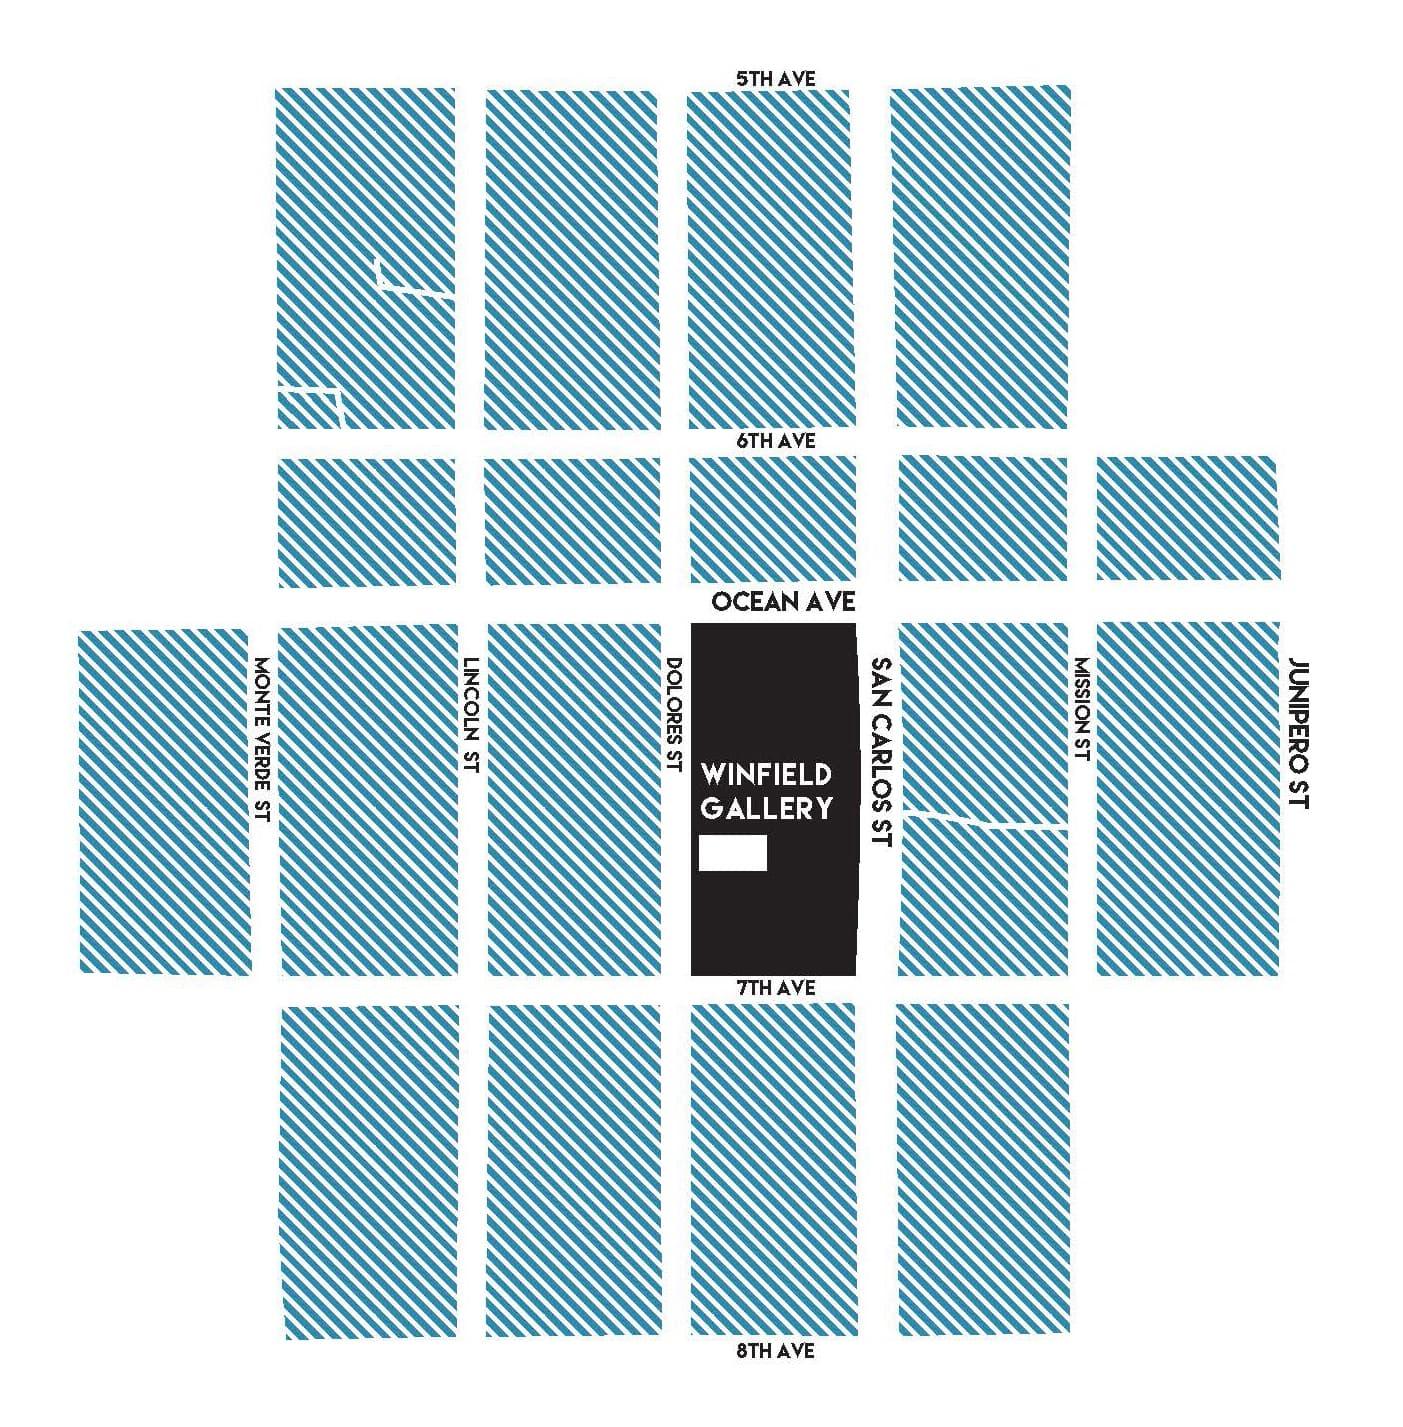 map of winfield gallery location